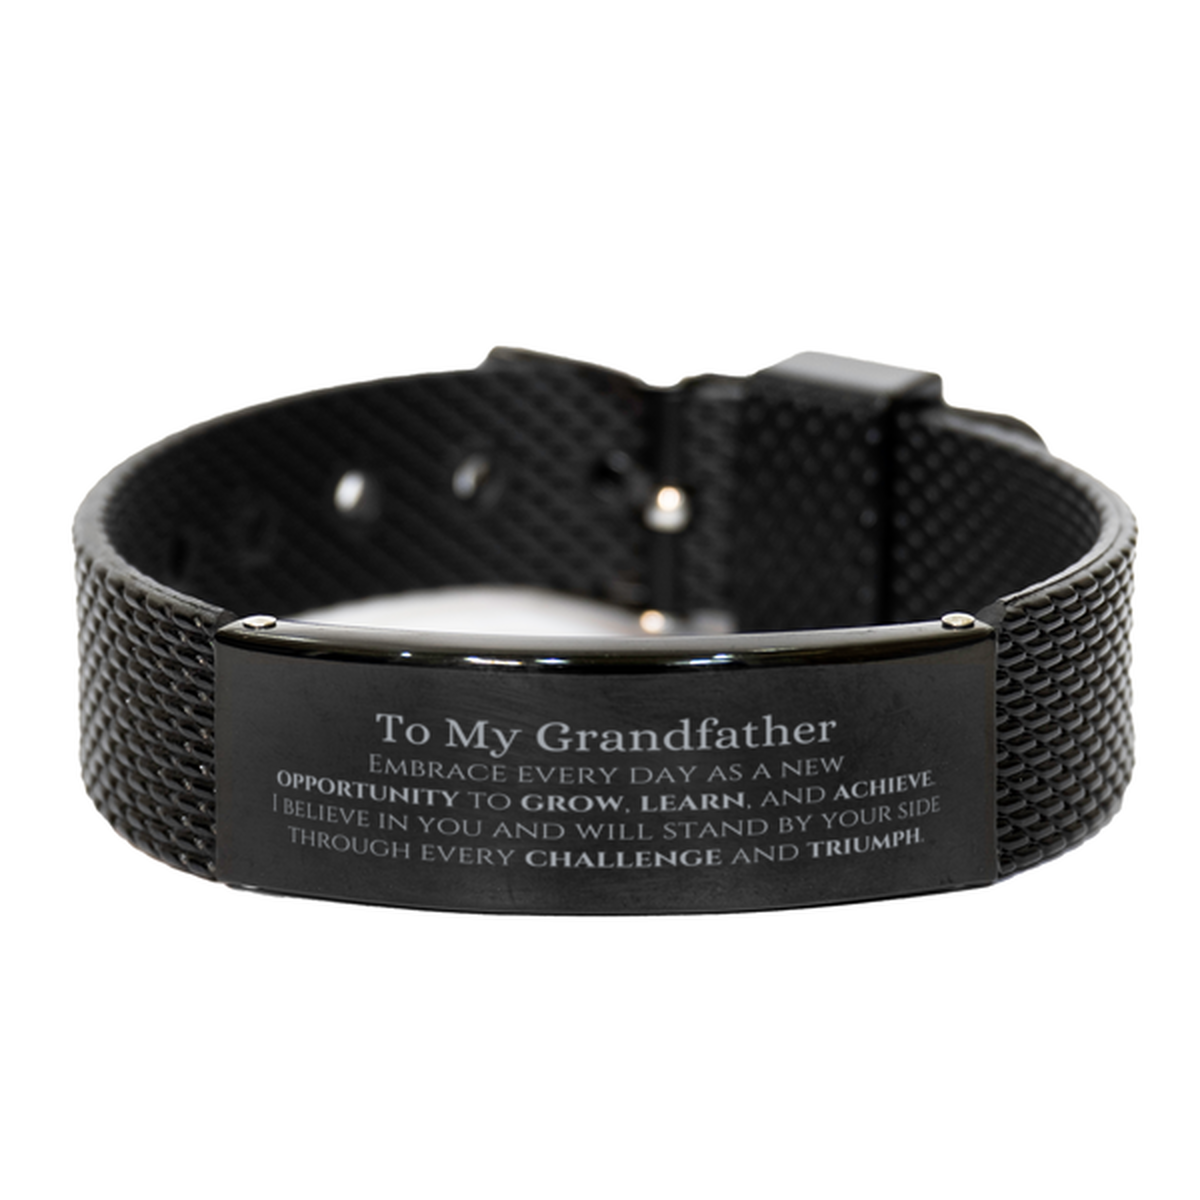 To My Grandfather Gifts, I believe in you and will stand by your side, Inspirational Black Shark Mesh Bracelet For Grandfather, Birthday Christmas Motivational Grandfather Gifts